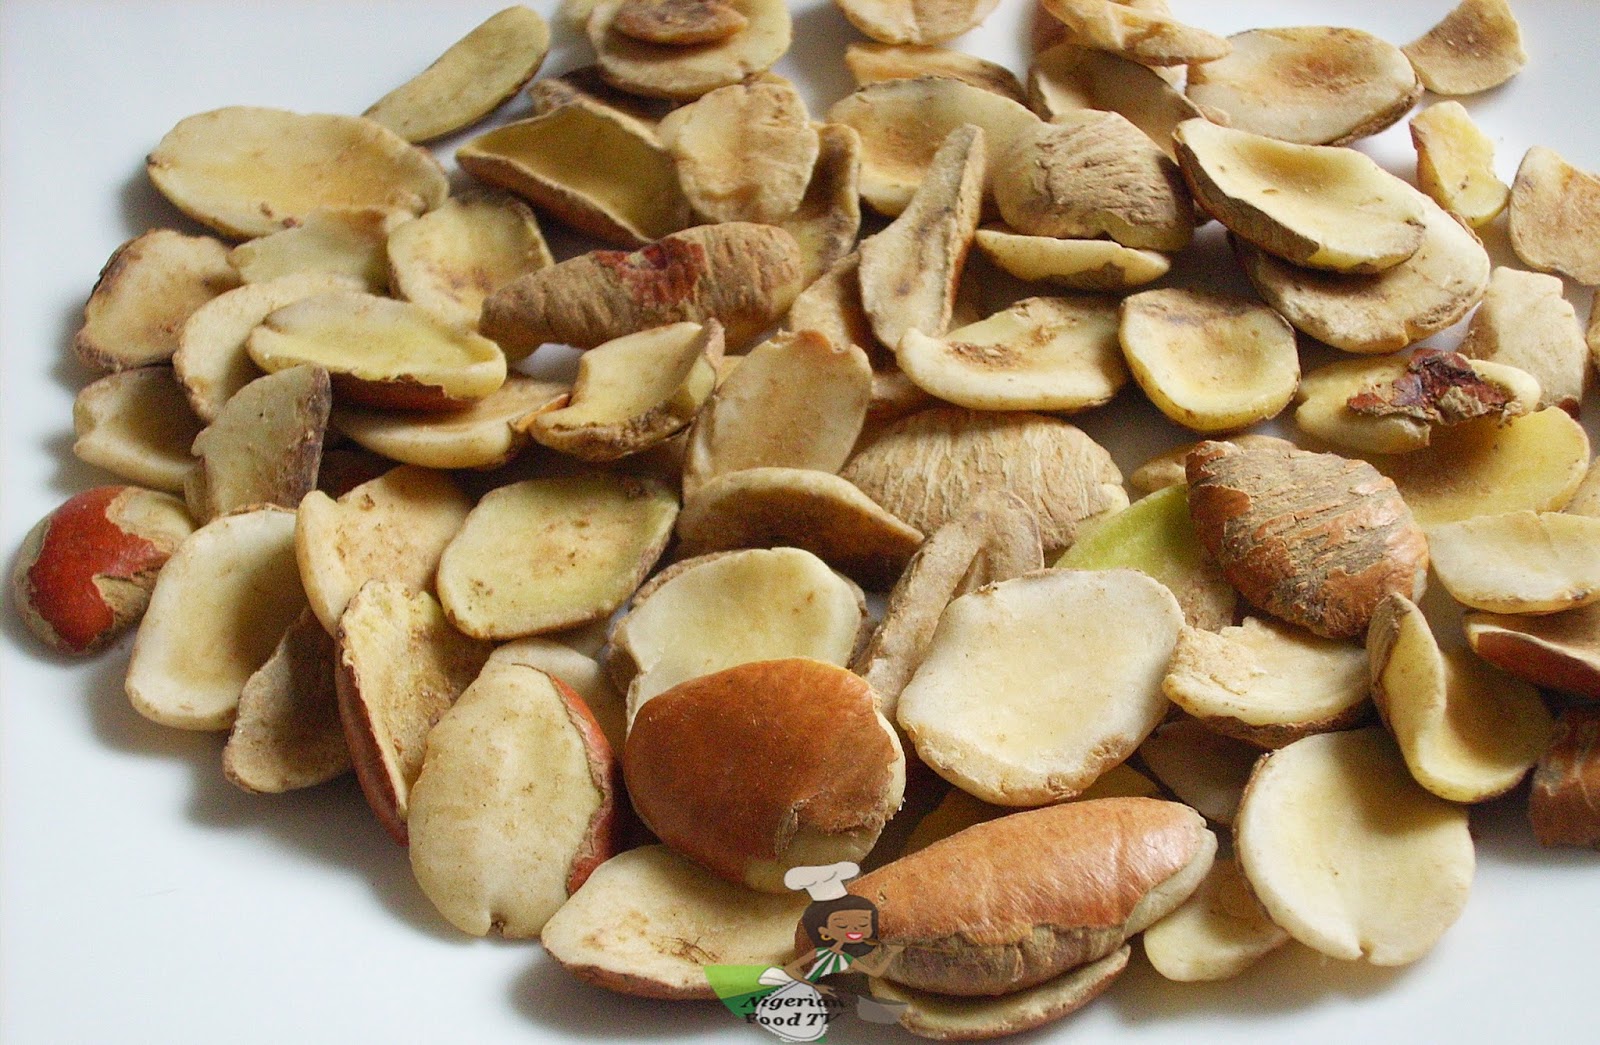 Ogbono seed , wild african mango seeds, Best Ogbono soup recipe, Ogbono seeds for weight loss, How to make Ogbono soup, Ogbono soup benefits, Where to buy Ogbono seeds, Ogbono soup and cholesterol, Nigerian Ogbono soup, Ogbono soup diet, Ogbono soup with vegetables, Healthy Ogbono soup recipes, Ogbono seeds health benefits, Weight loss with African mango seeds, Ogbono soup nutrition, Ogbono soup and blood sugar, Ogbono soup and heart health, Quick Ogbono soup recipe, Ogbono soup and dietary fiber, Ogbono seeds in African cuisine, Spicy Ogbono soup, Ogbono soup for vegetarians, Ogbono soup and metabolism,